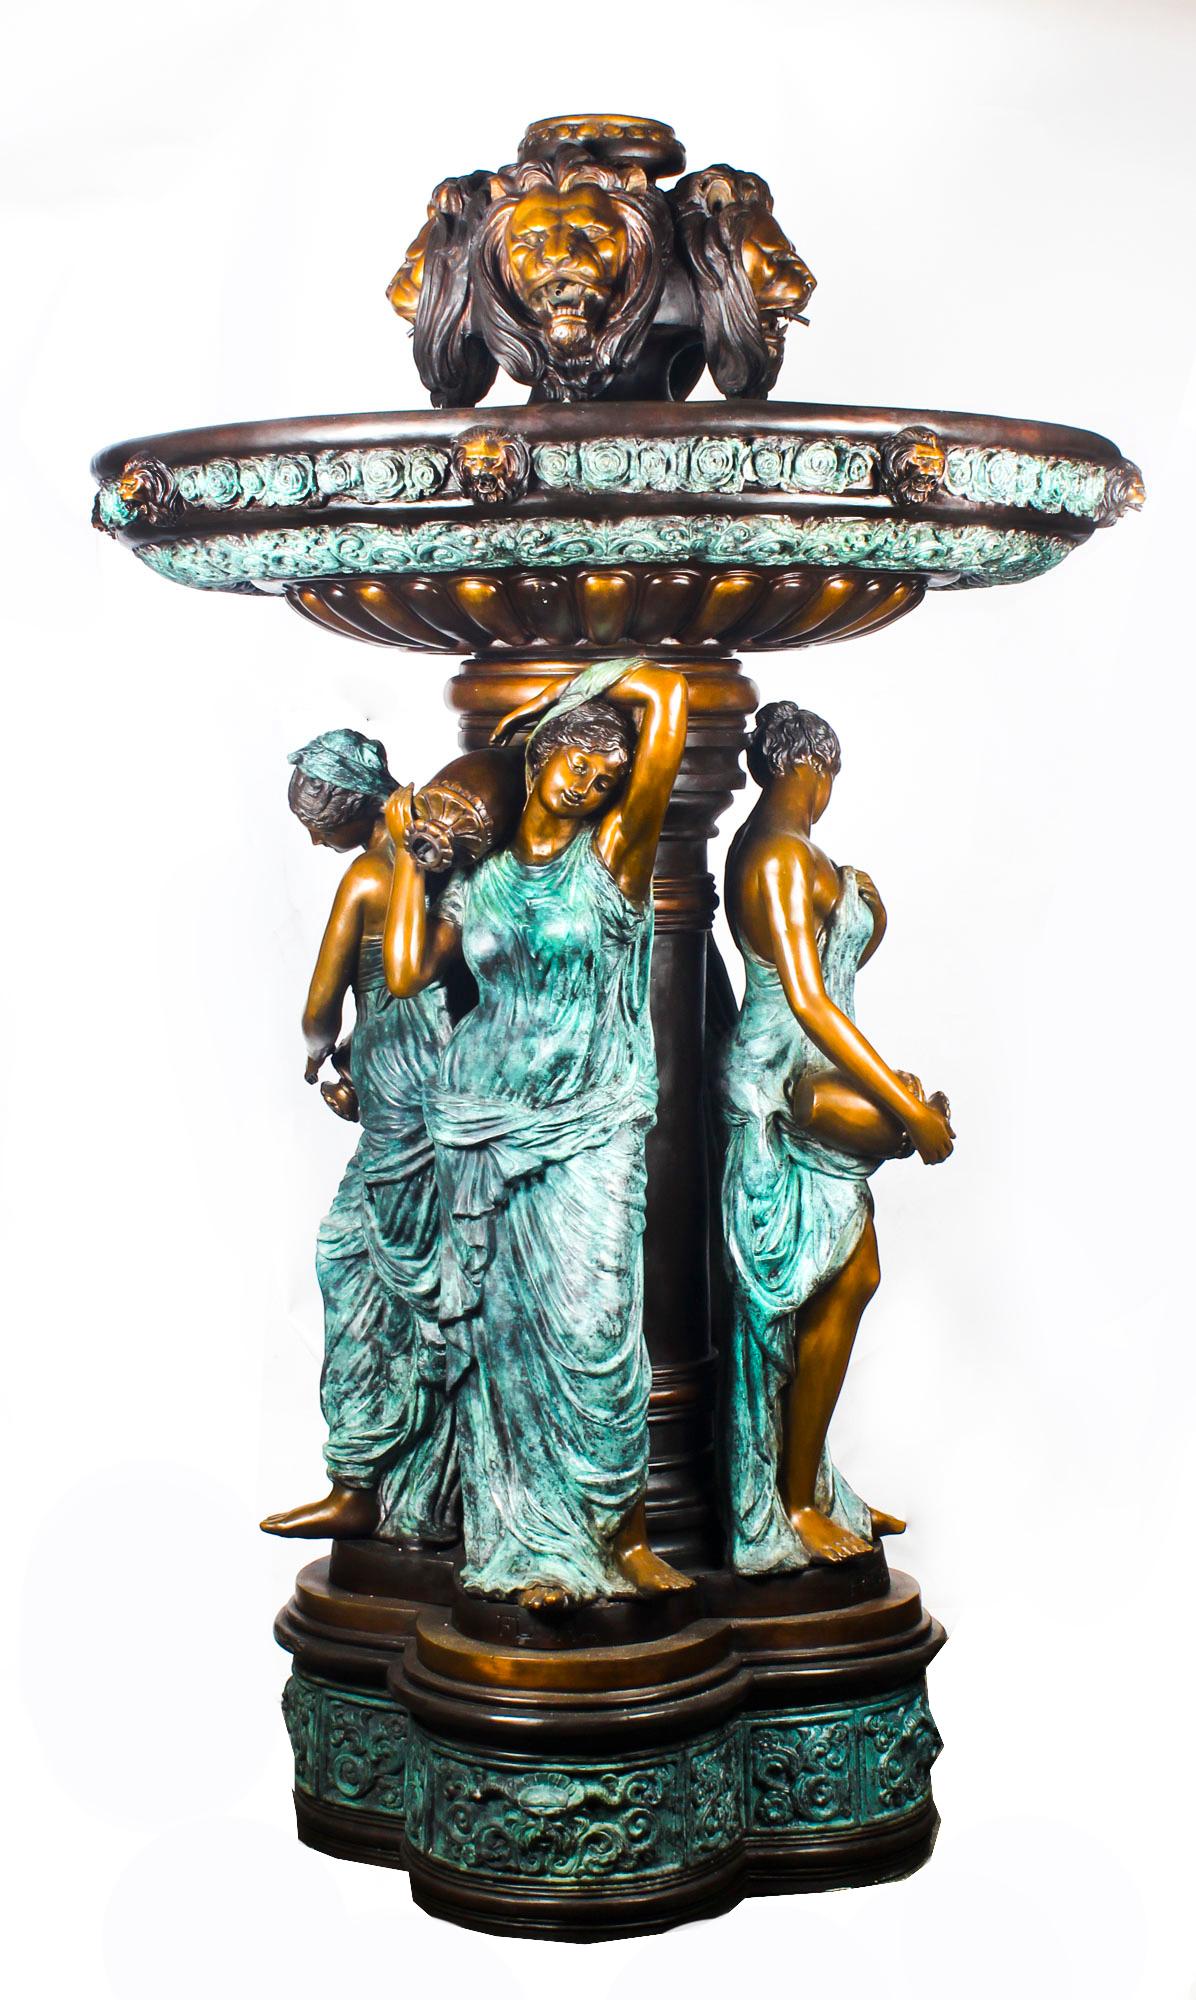 Vintage Monumental Neo-Classical Revival Bronze Sculptural Pond Fountain 20th C For Sale 12